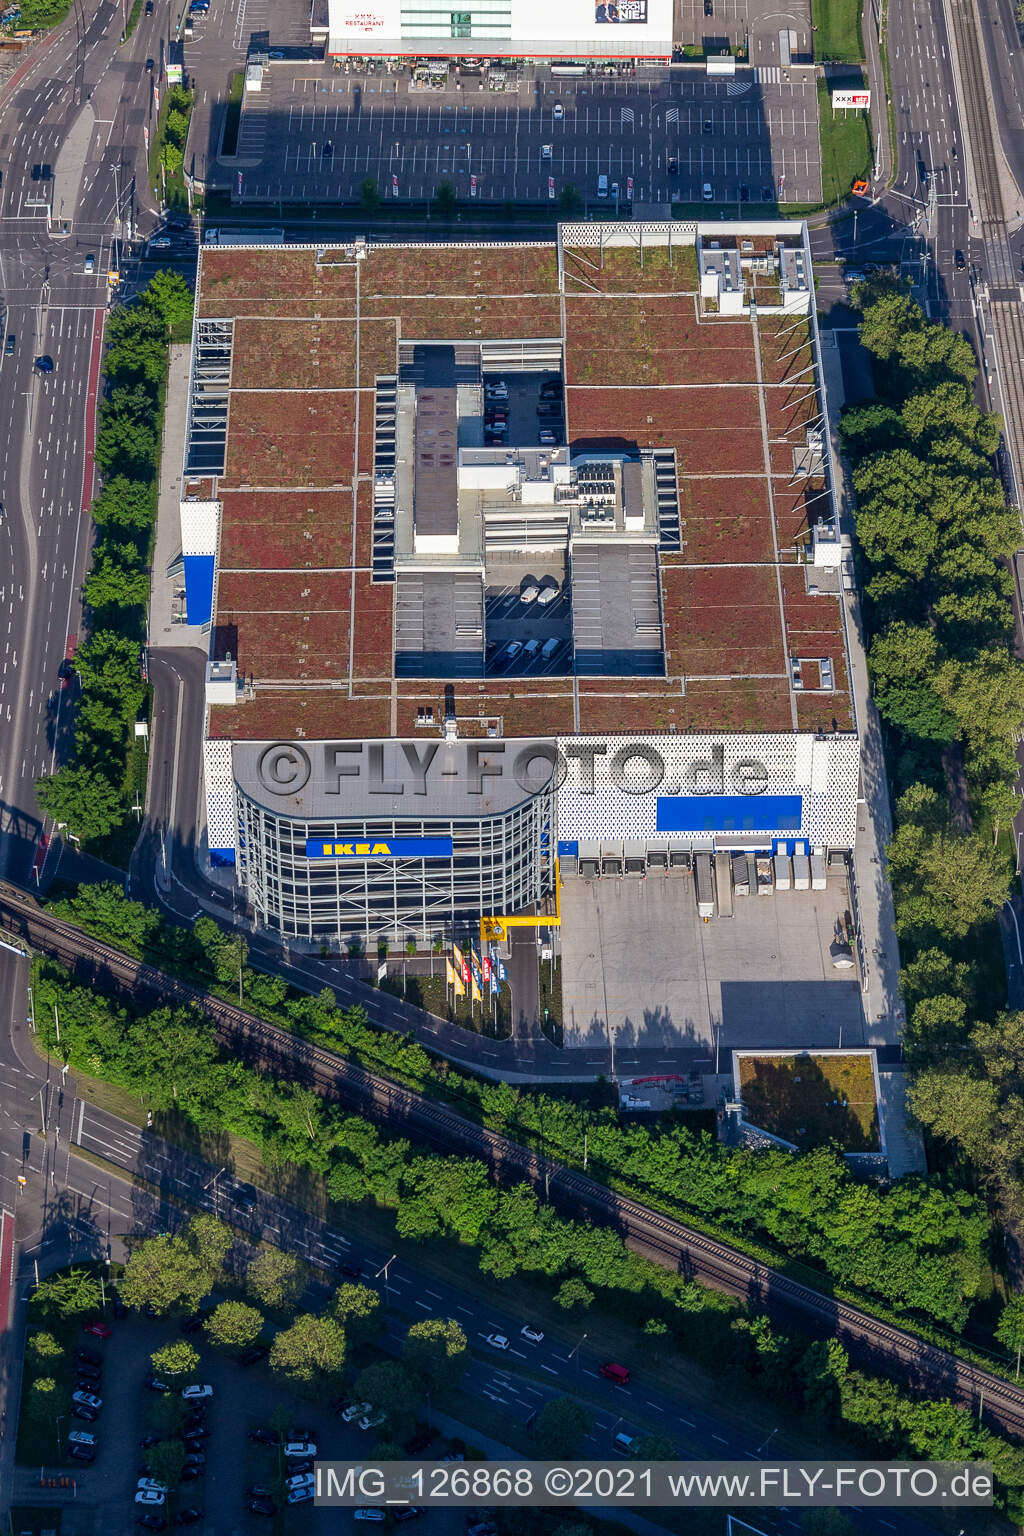 Building store - furniture market of " IKEA Deutschland GmbH & Co. KG " on Gerwigstrasse - Weinweg - Durlacher Allee in Karlsruhe in the state Baden-Wurttemberg, Germany out of the air